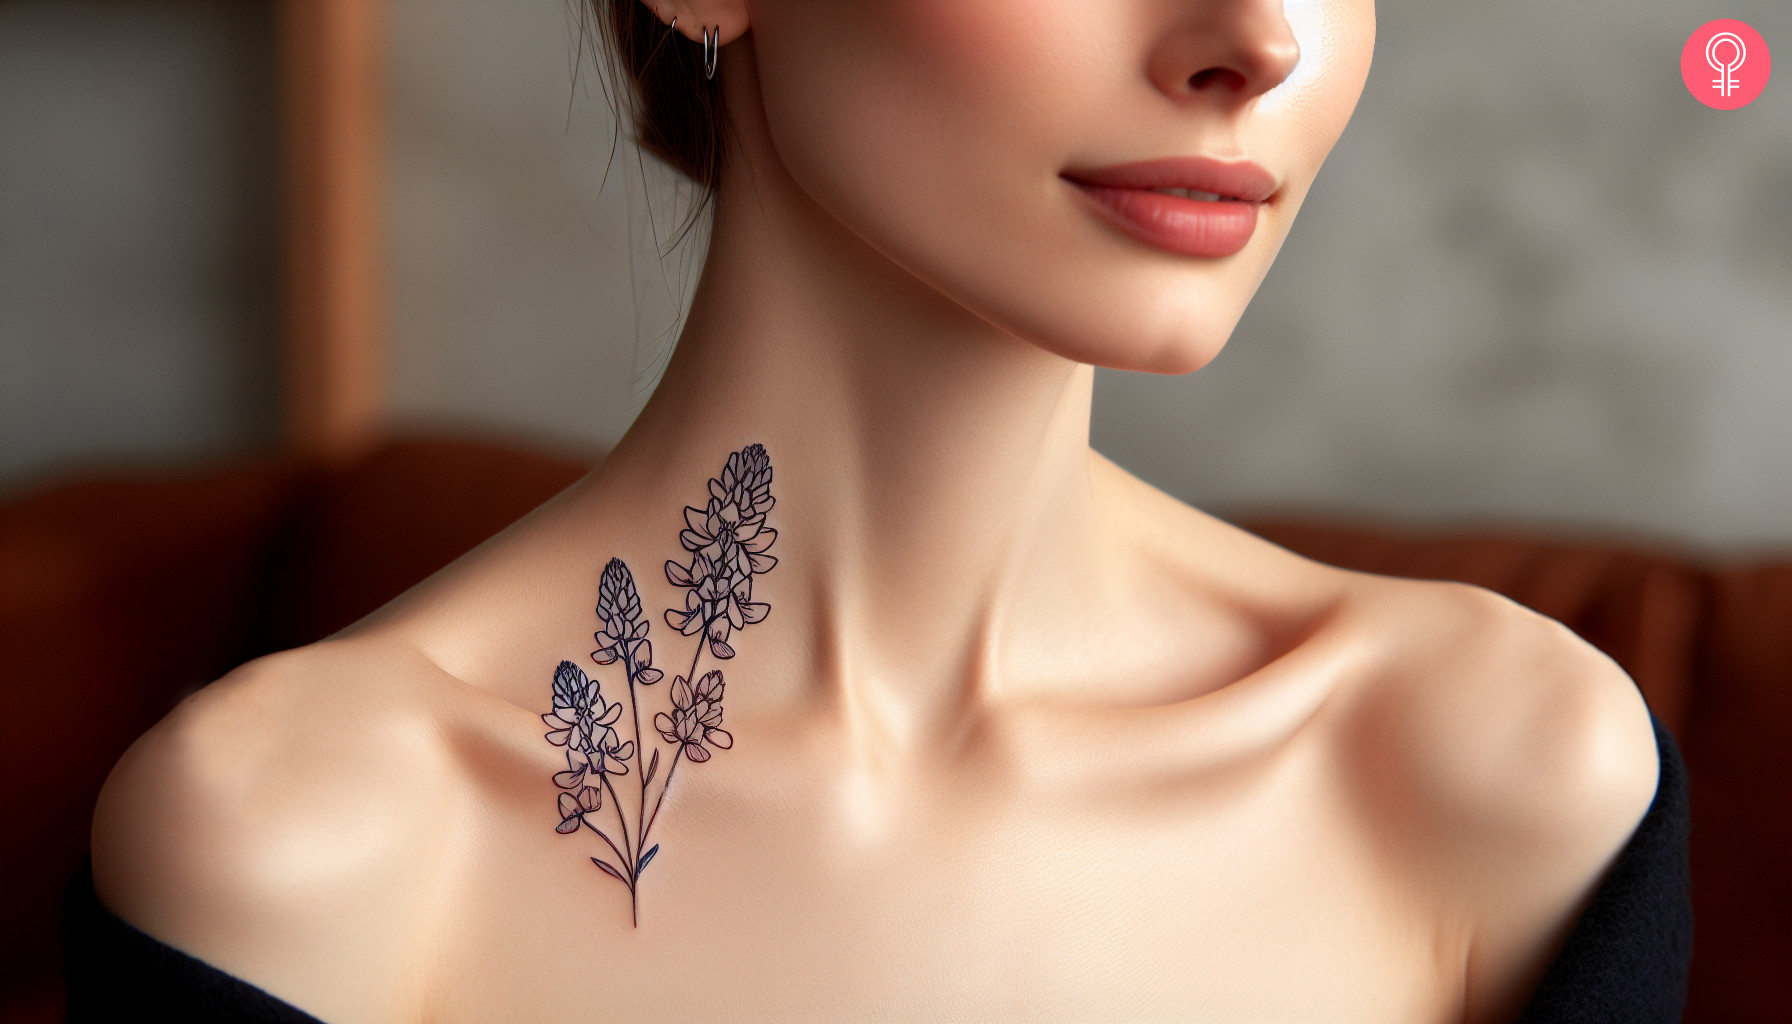 Bluebonnet outline tattoo design on the neck of a woman